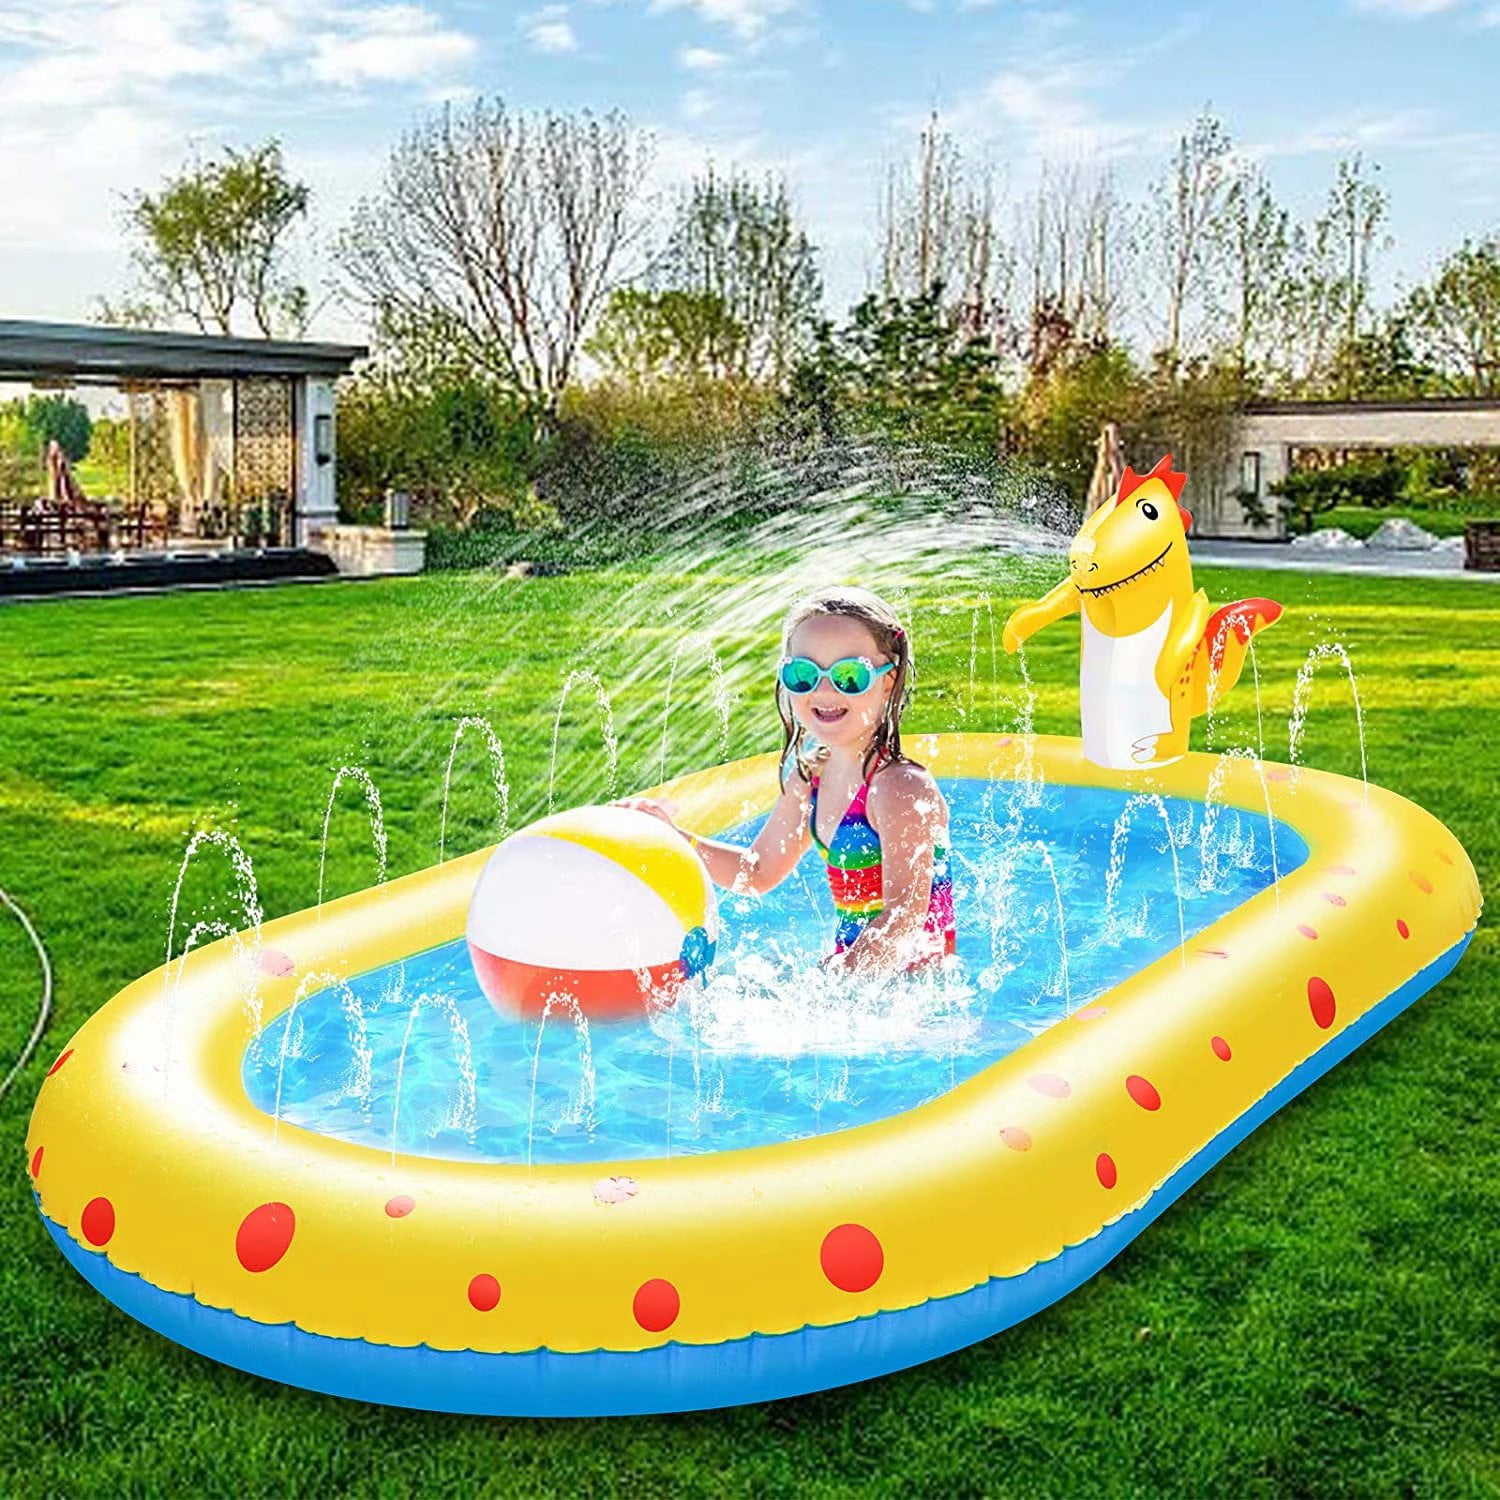 Kids pool inflatable toy Child play water-craft jet Infant/Toddler sea fun game 